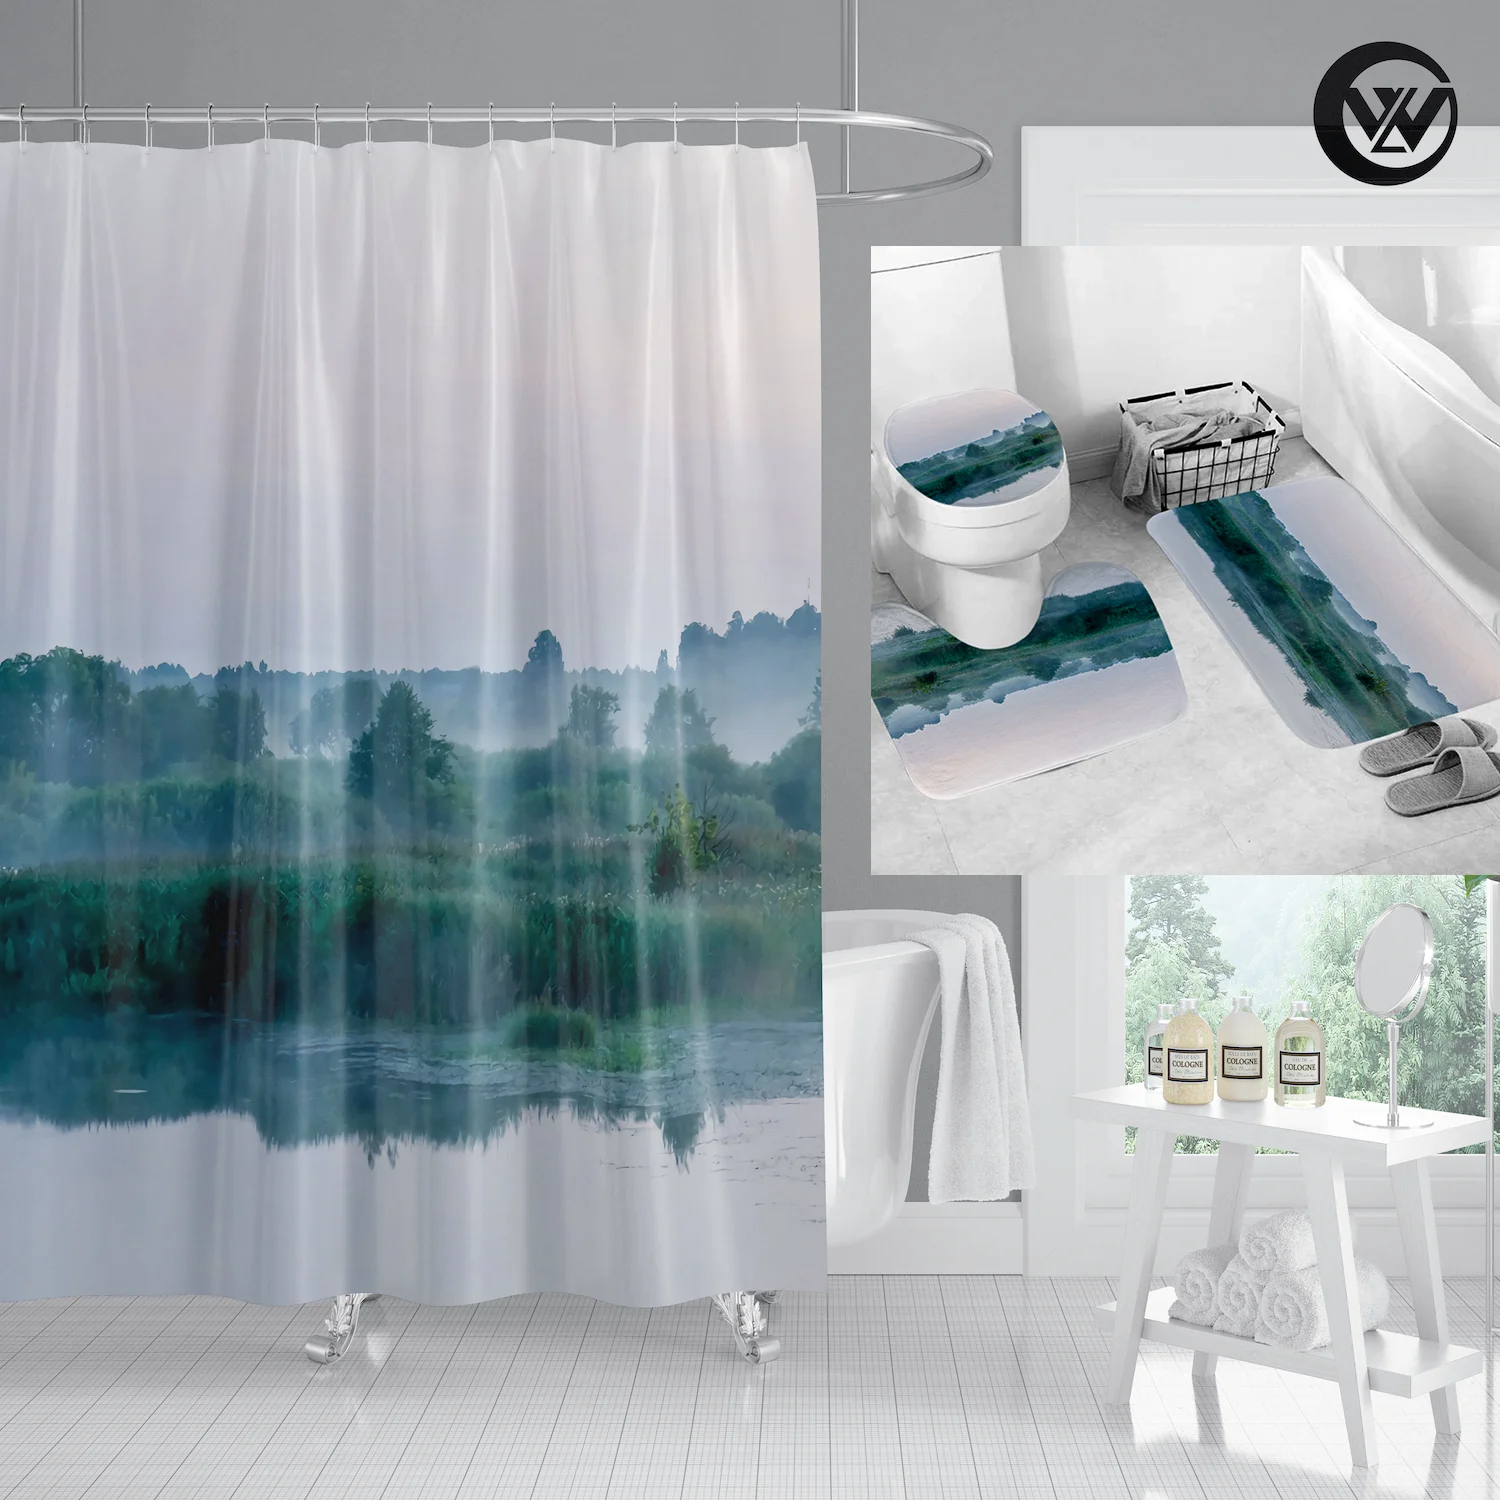 

Eco Friendly Shower Curtain Non-Slip Rugs Bath Mat Toilet Lid Cover Morning Mist Country Lake Woods Scenery Waterproof Polyester